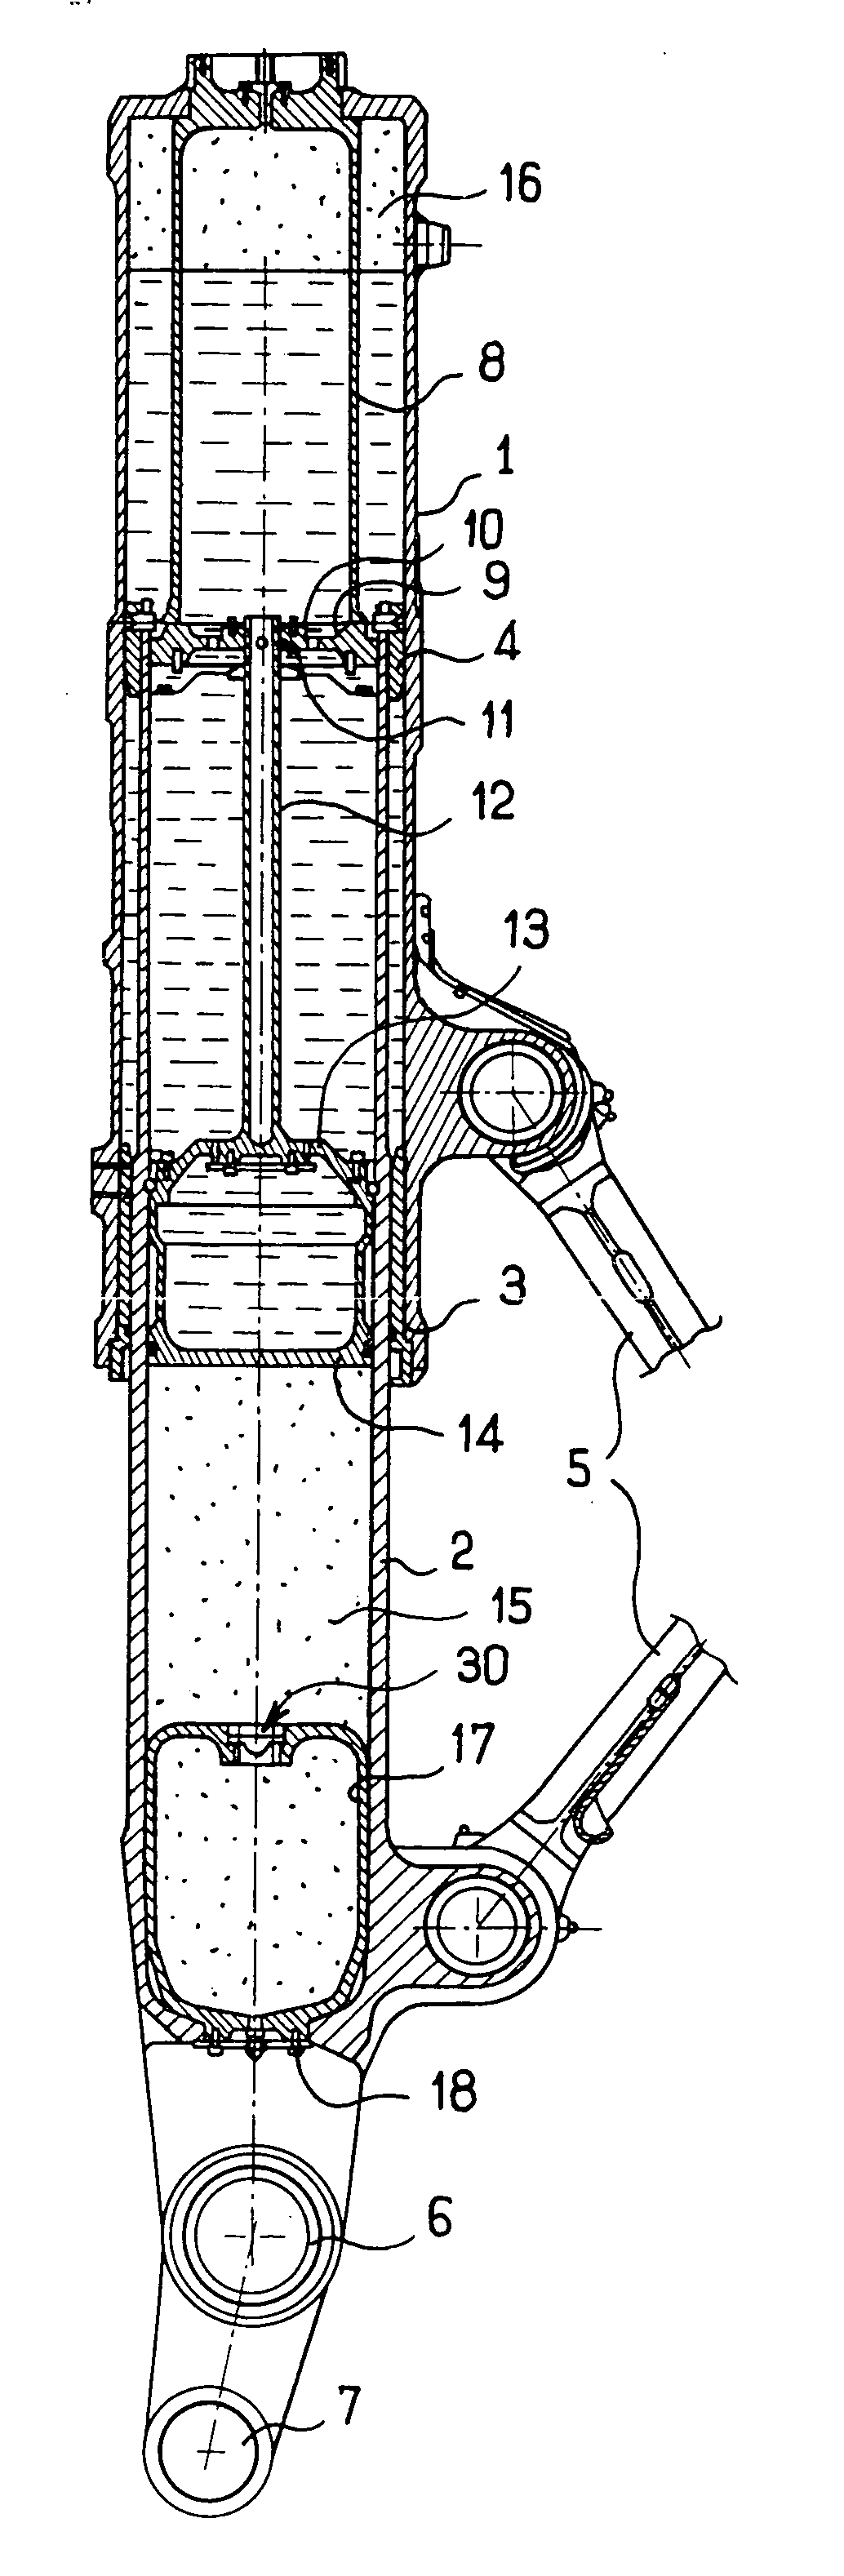 Landing gear having a gas vessel, and methods of maintaining such landing gear